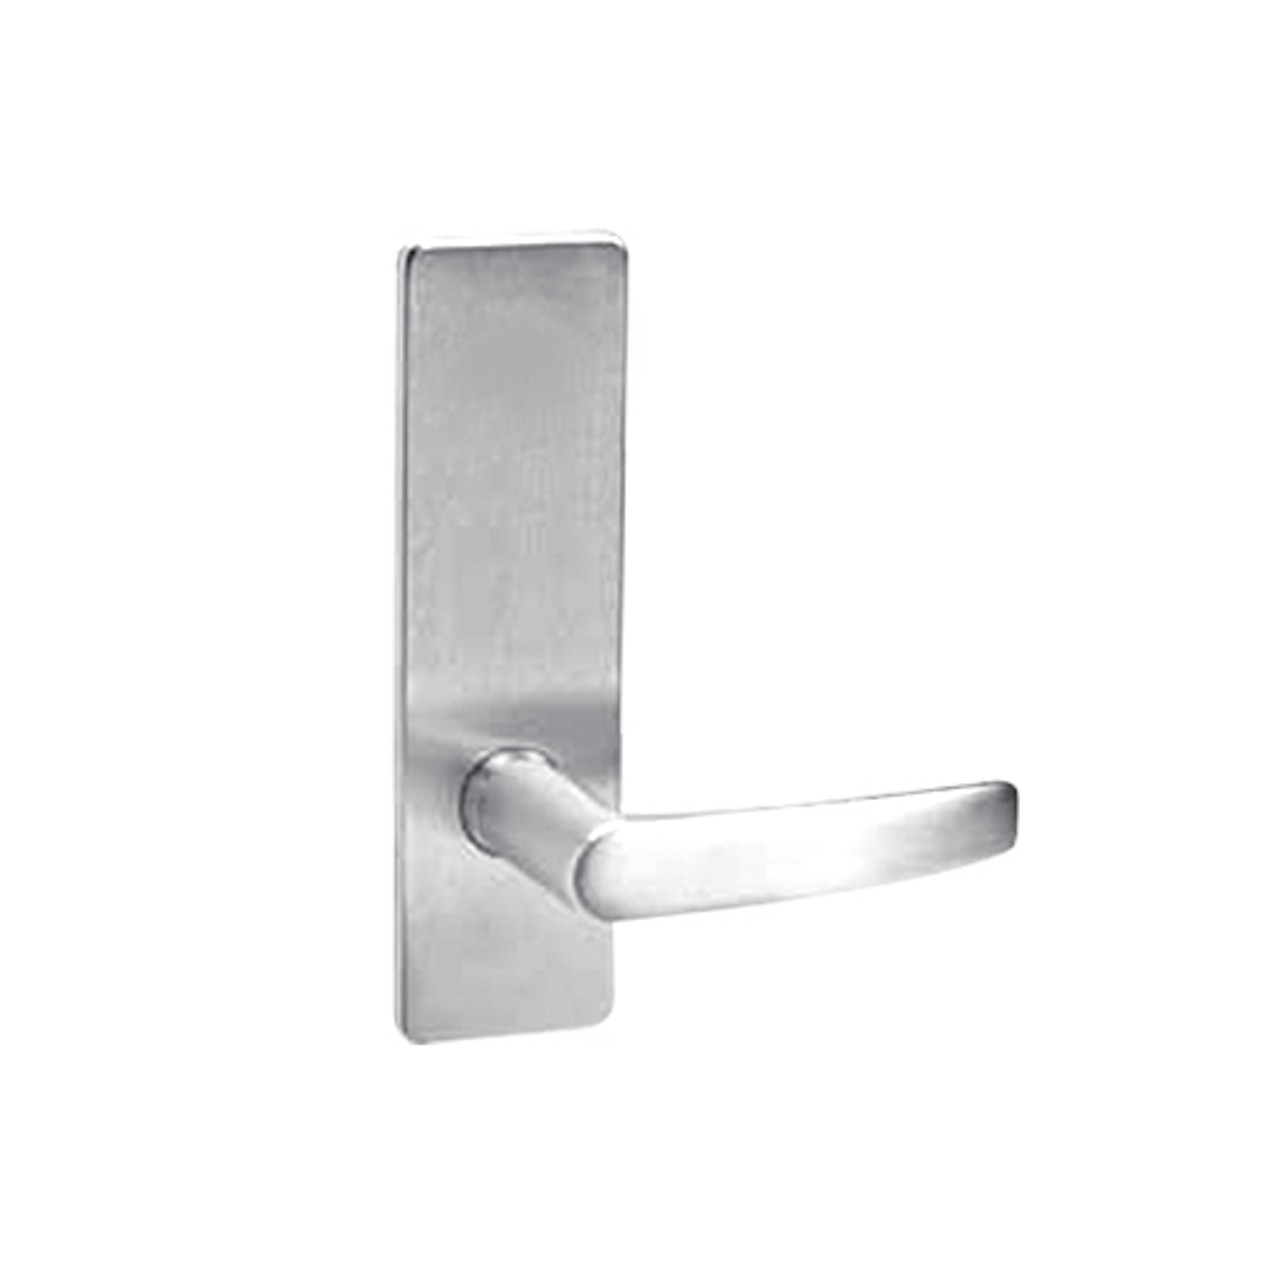 ML2060-ASN-629-M31 Corbin Russwin ML2000 Series Mortise Privacy Locksets with Armstrong Lever in Bright Stainless Steel